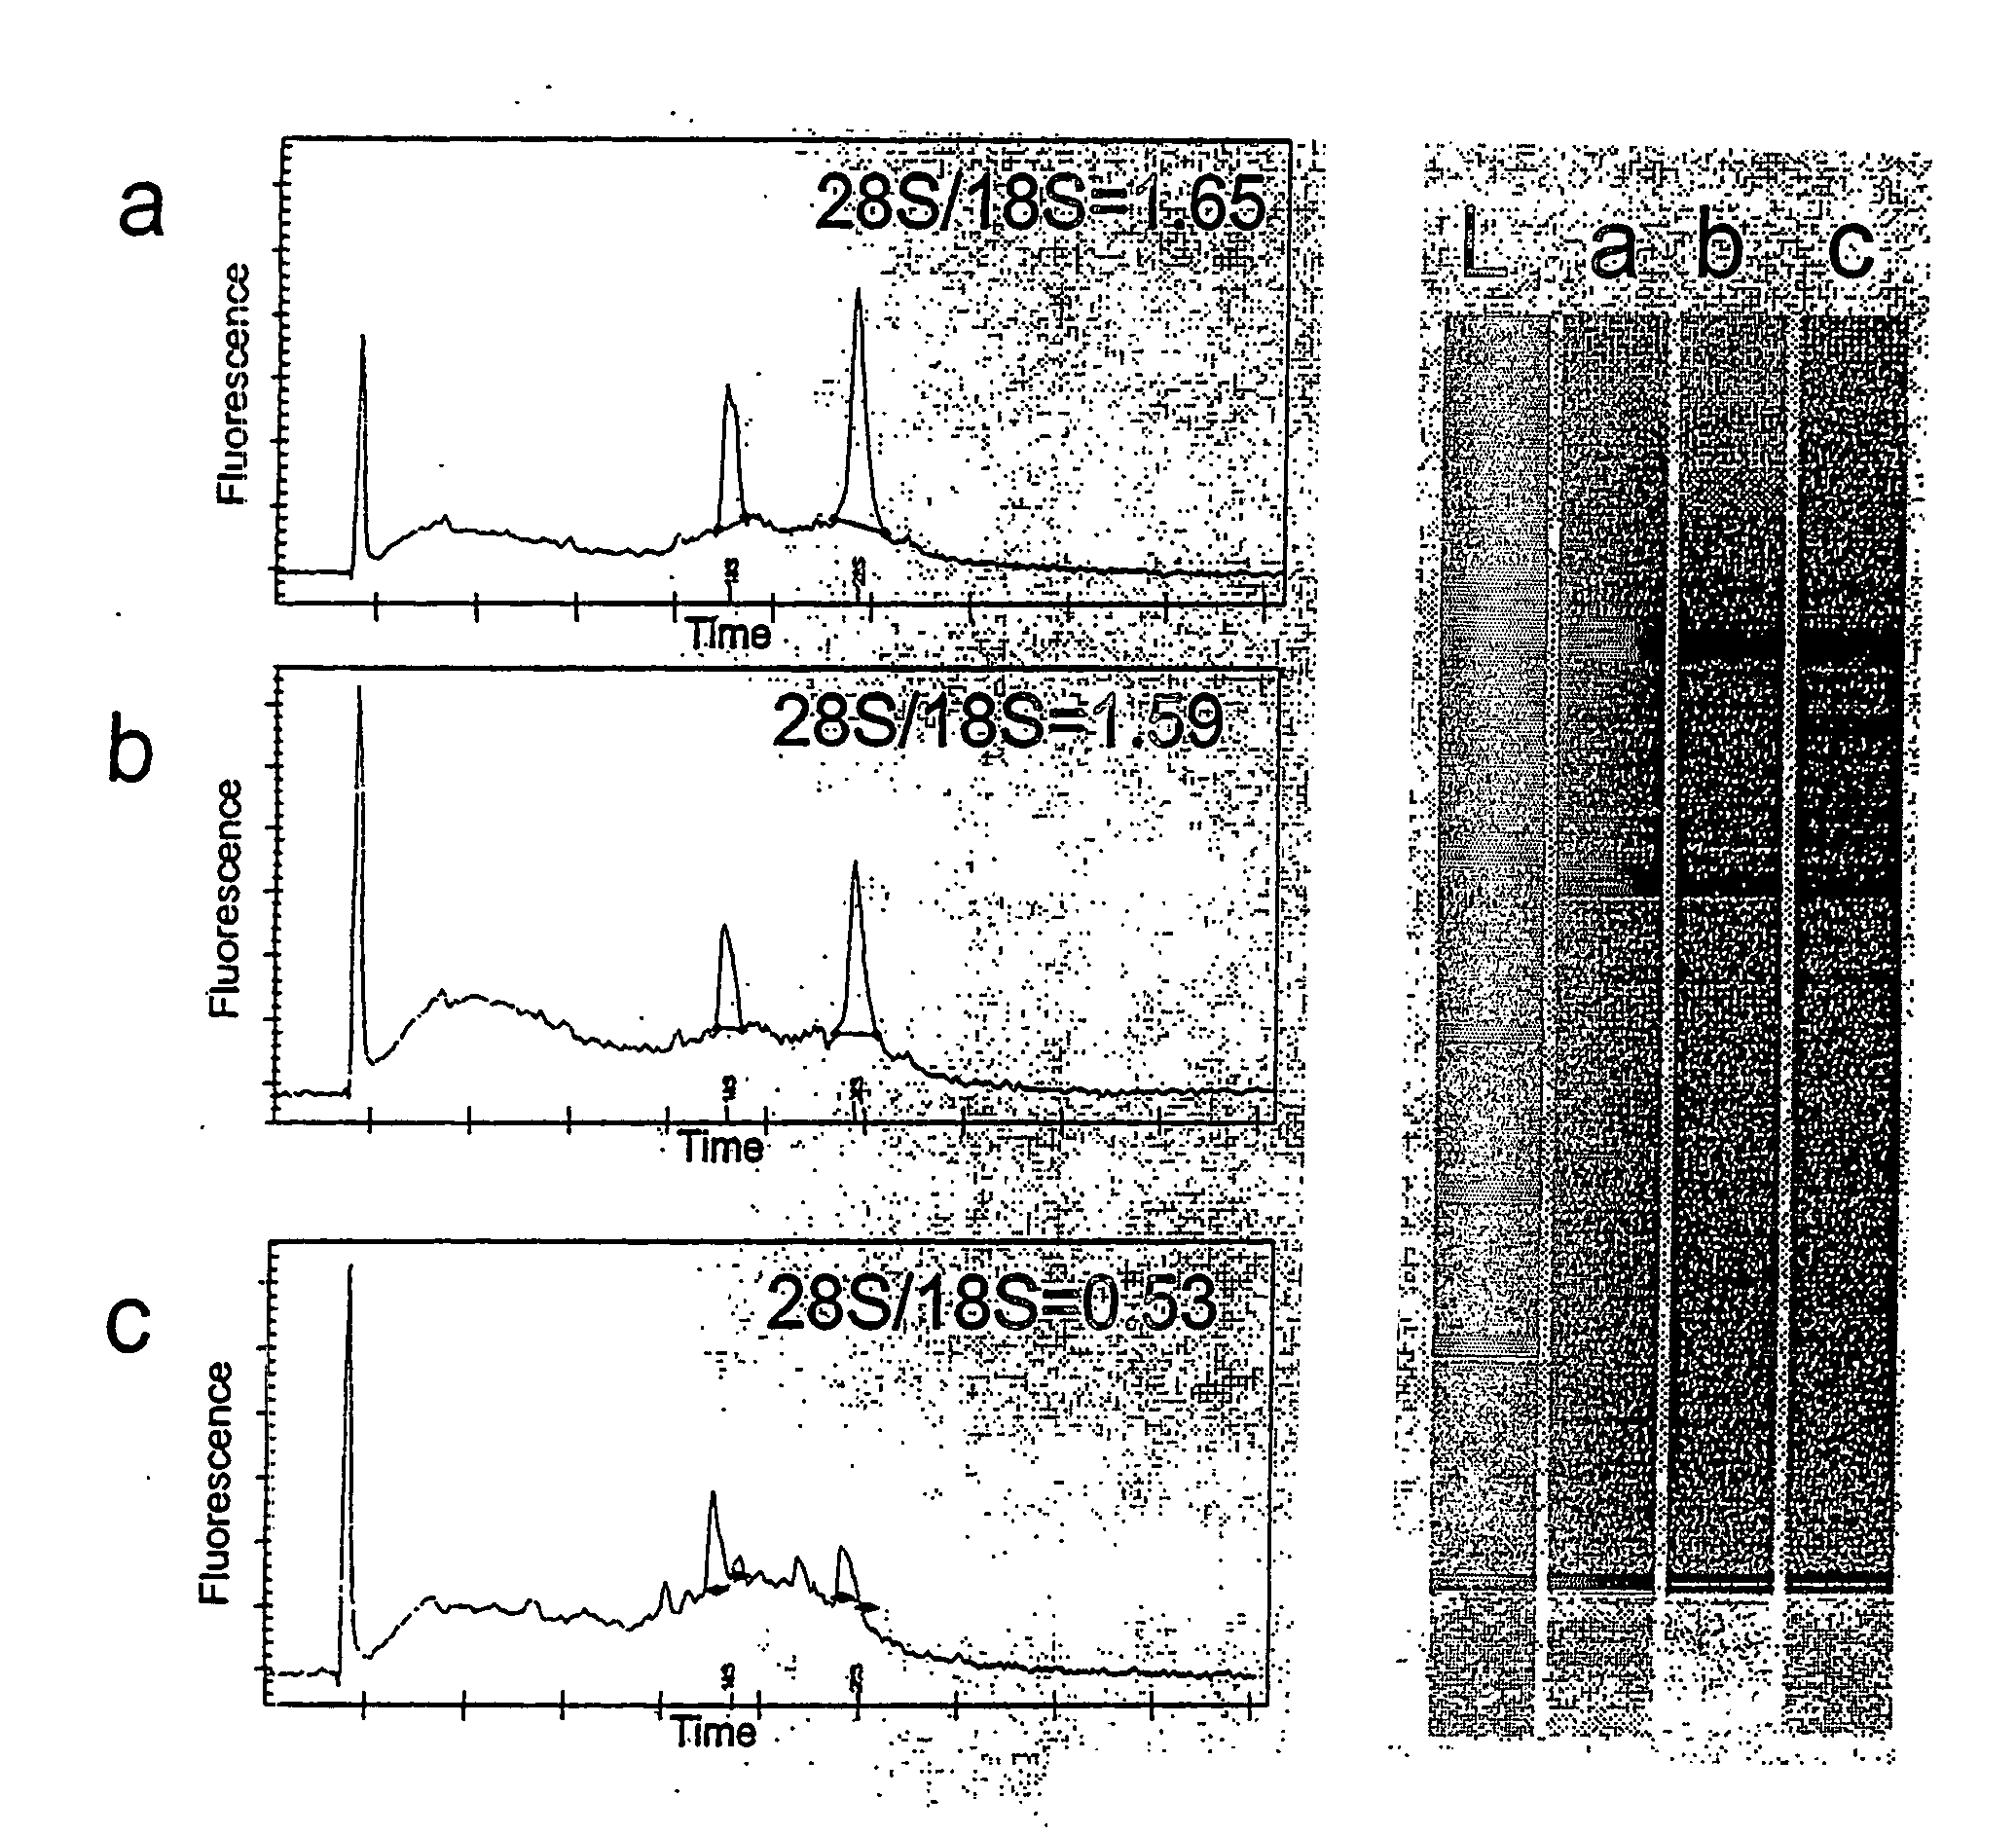 Methods For Idendifying Drug Targets And Modulators Of Neurons and Compositions Comprising The Same